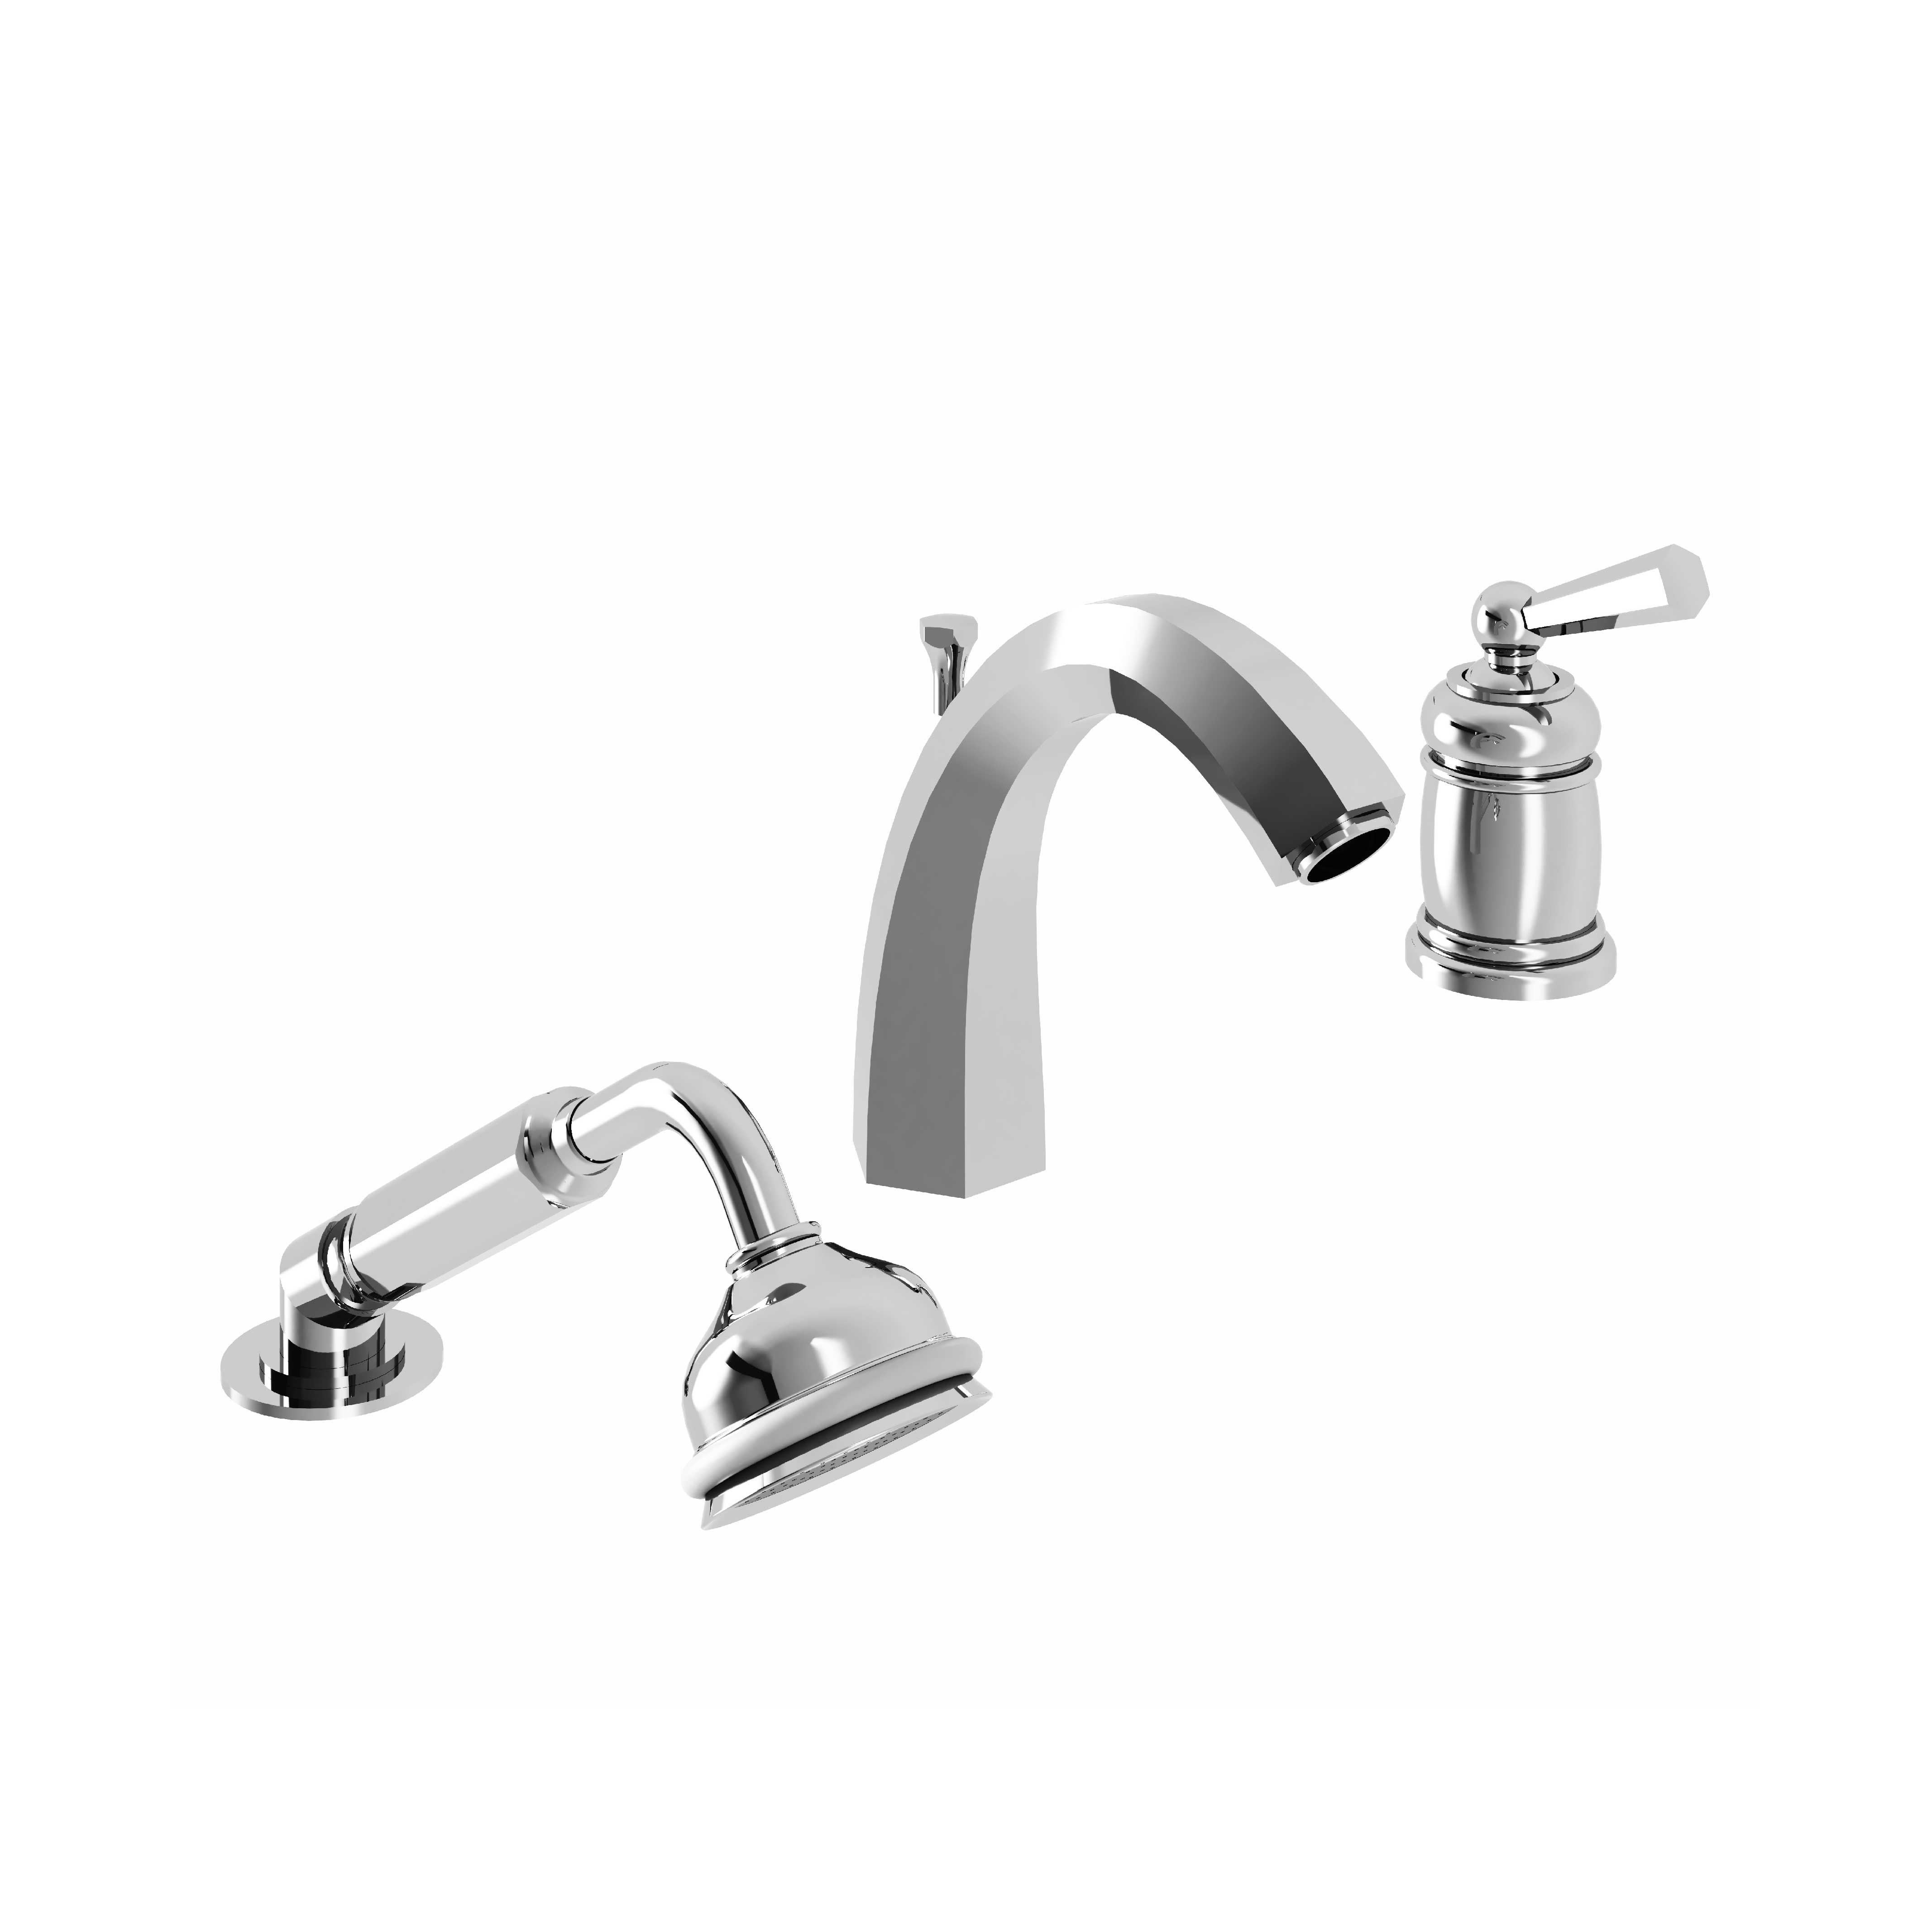 M38-3301MH 3-hole single-lever bath and shower mixer, high spout